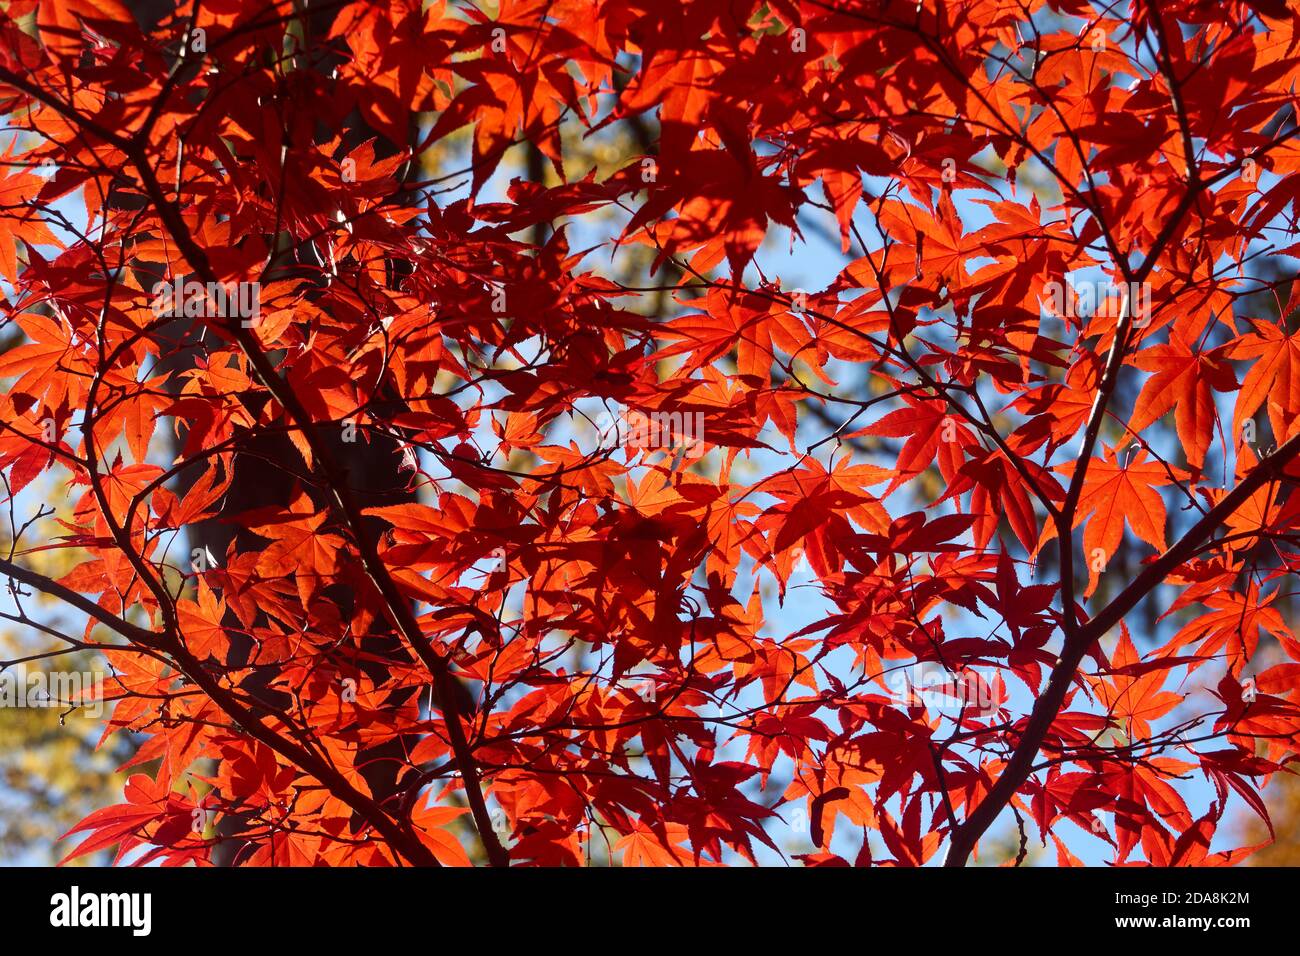 Backlit red Japanese Maple (Acer palmatum) tree leaves in the fall, Vancouver, British Columbia, Canada Stock Photo